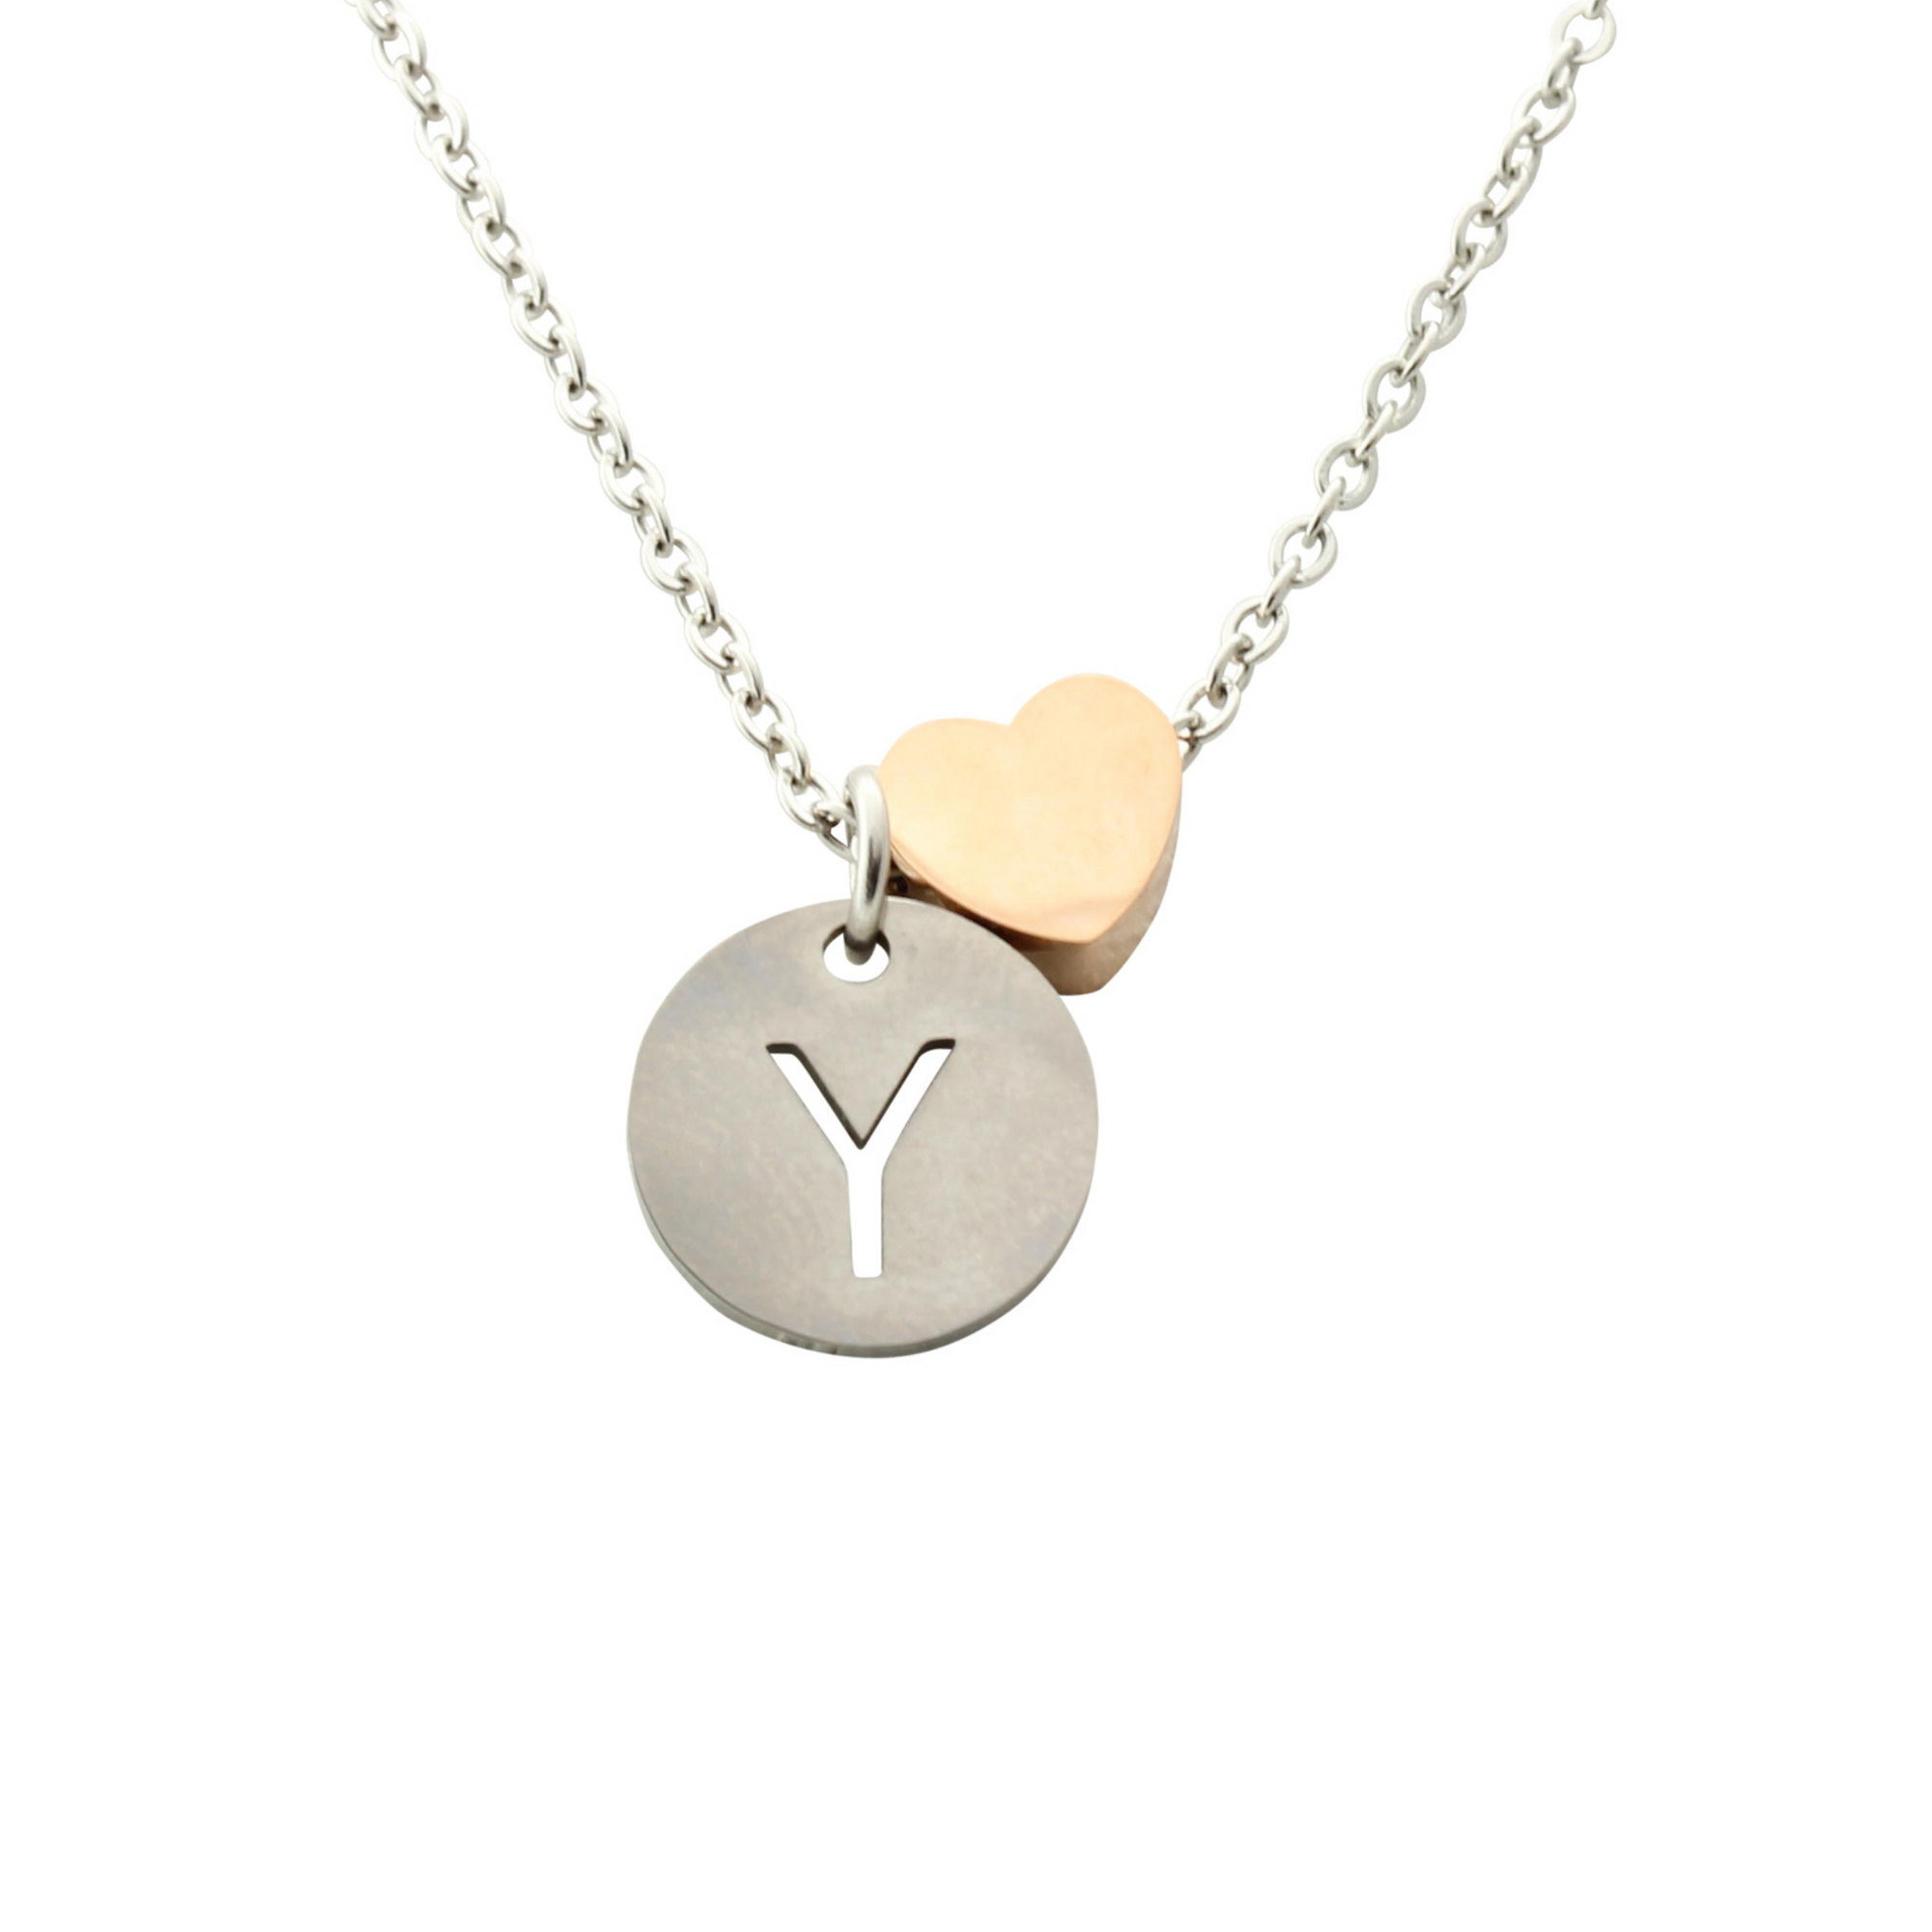 "Le Délice" Waterproof Personalized Initial Necklace with Heart - Silver/Rose Gold